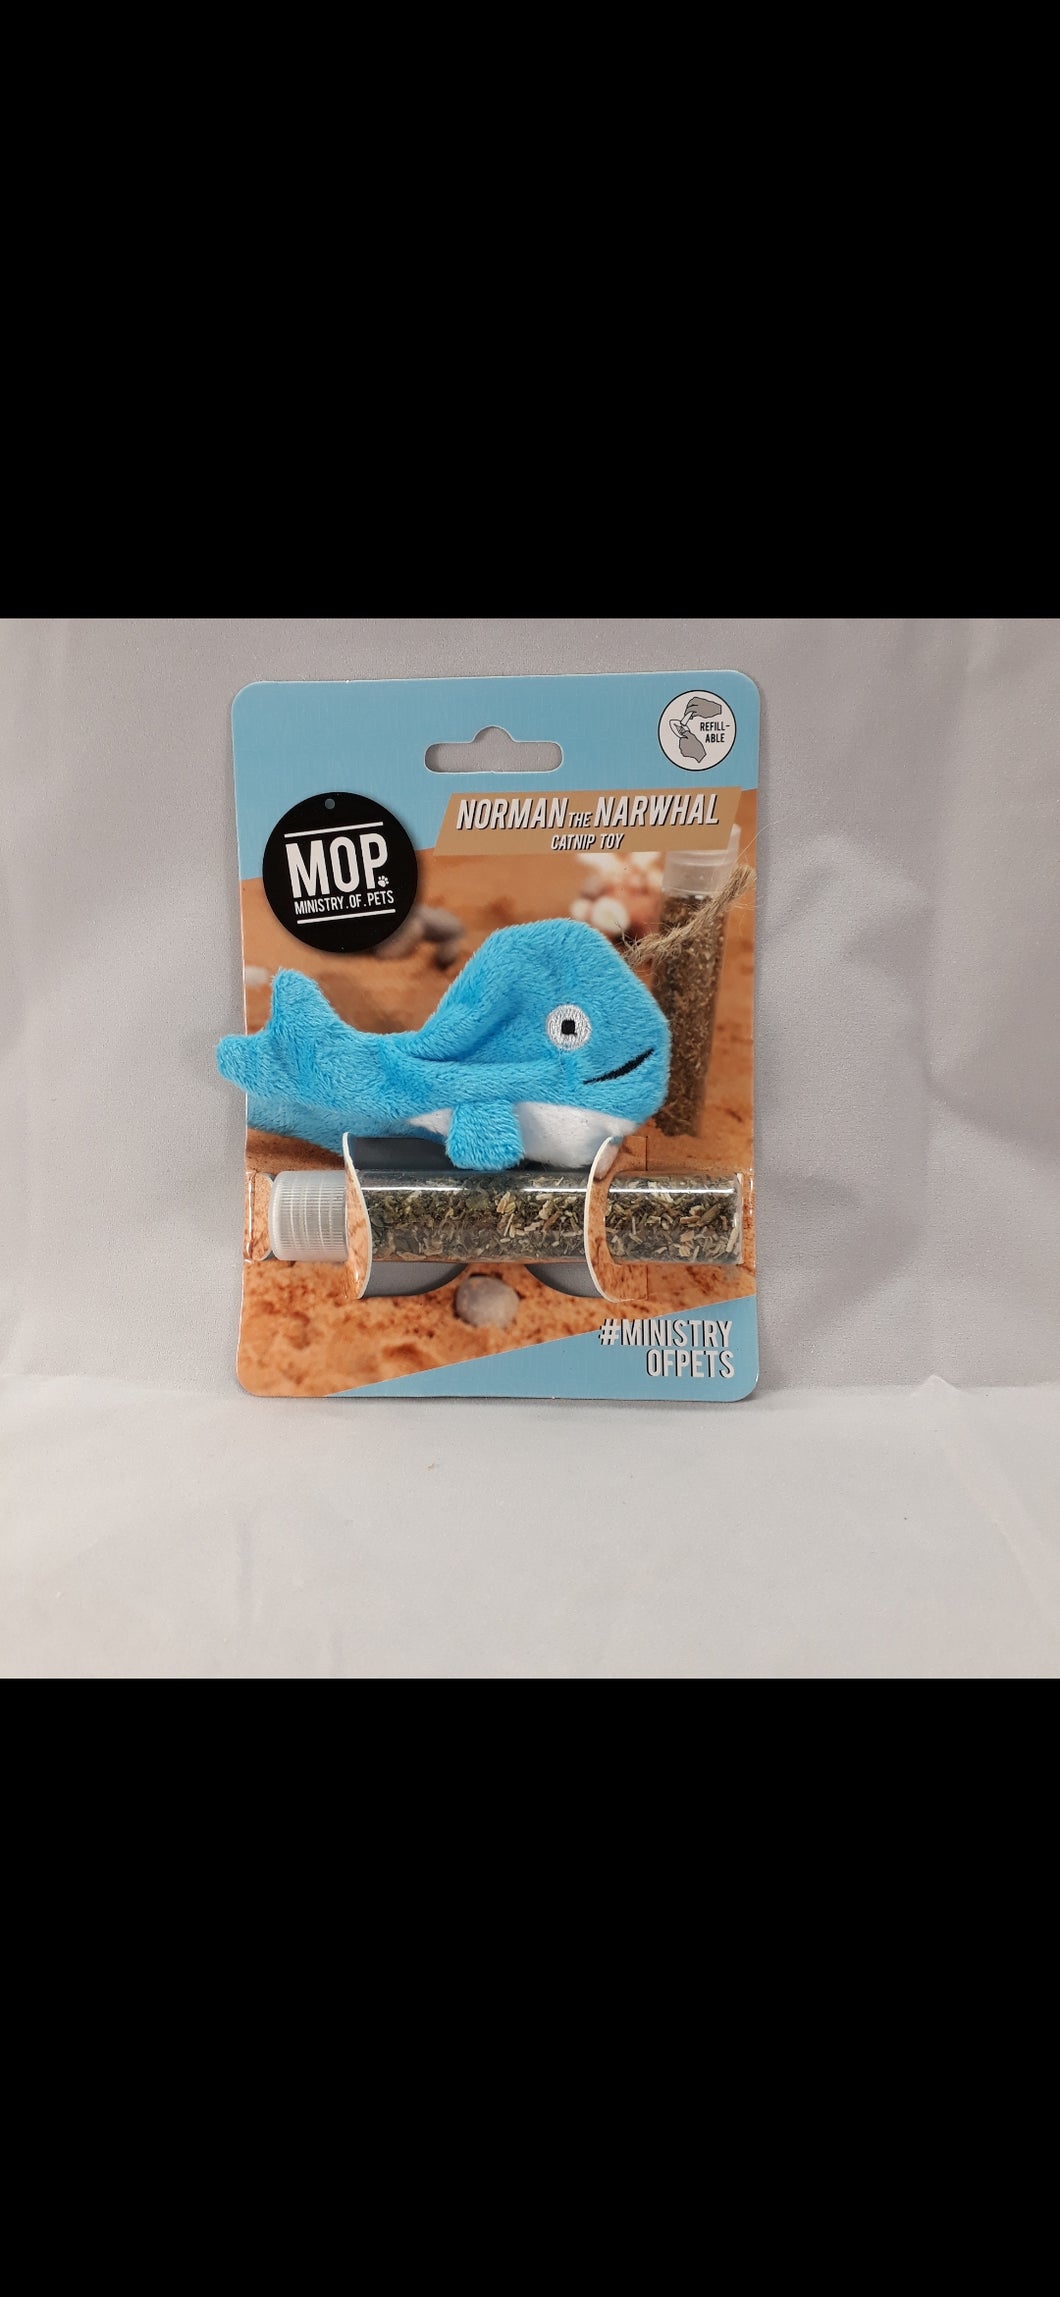 Ministry of Pets Norman the Narwhal Catnip Toy